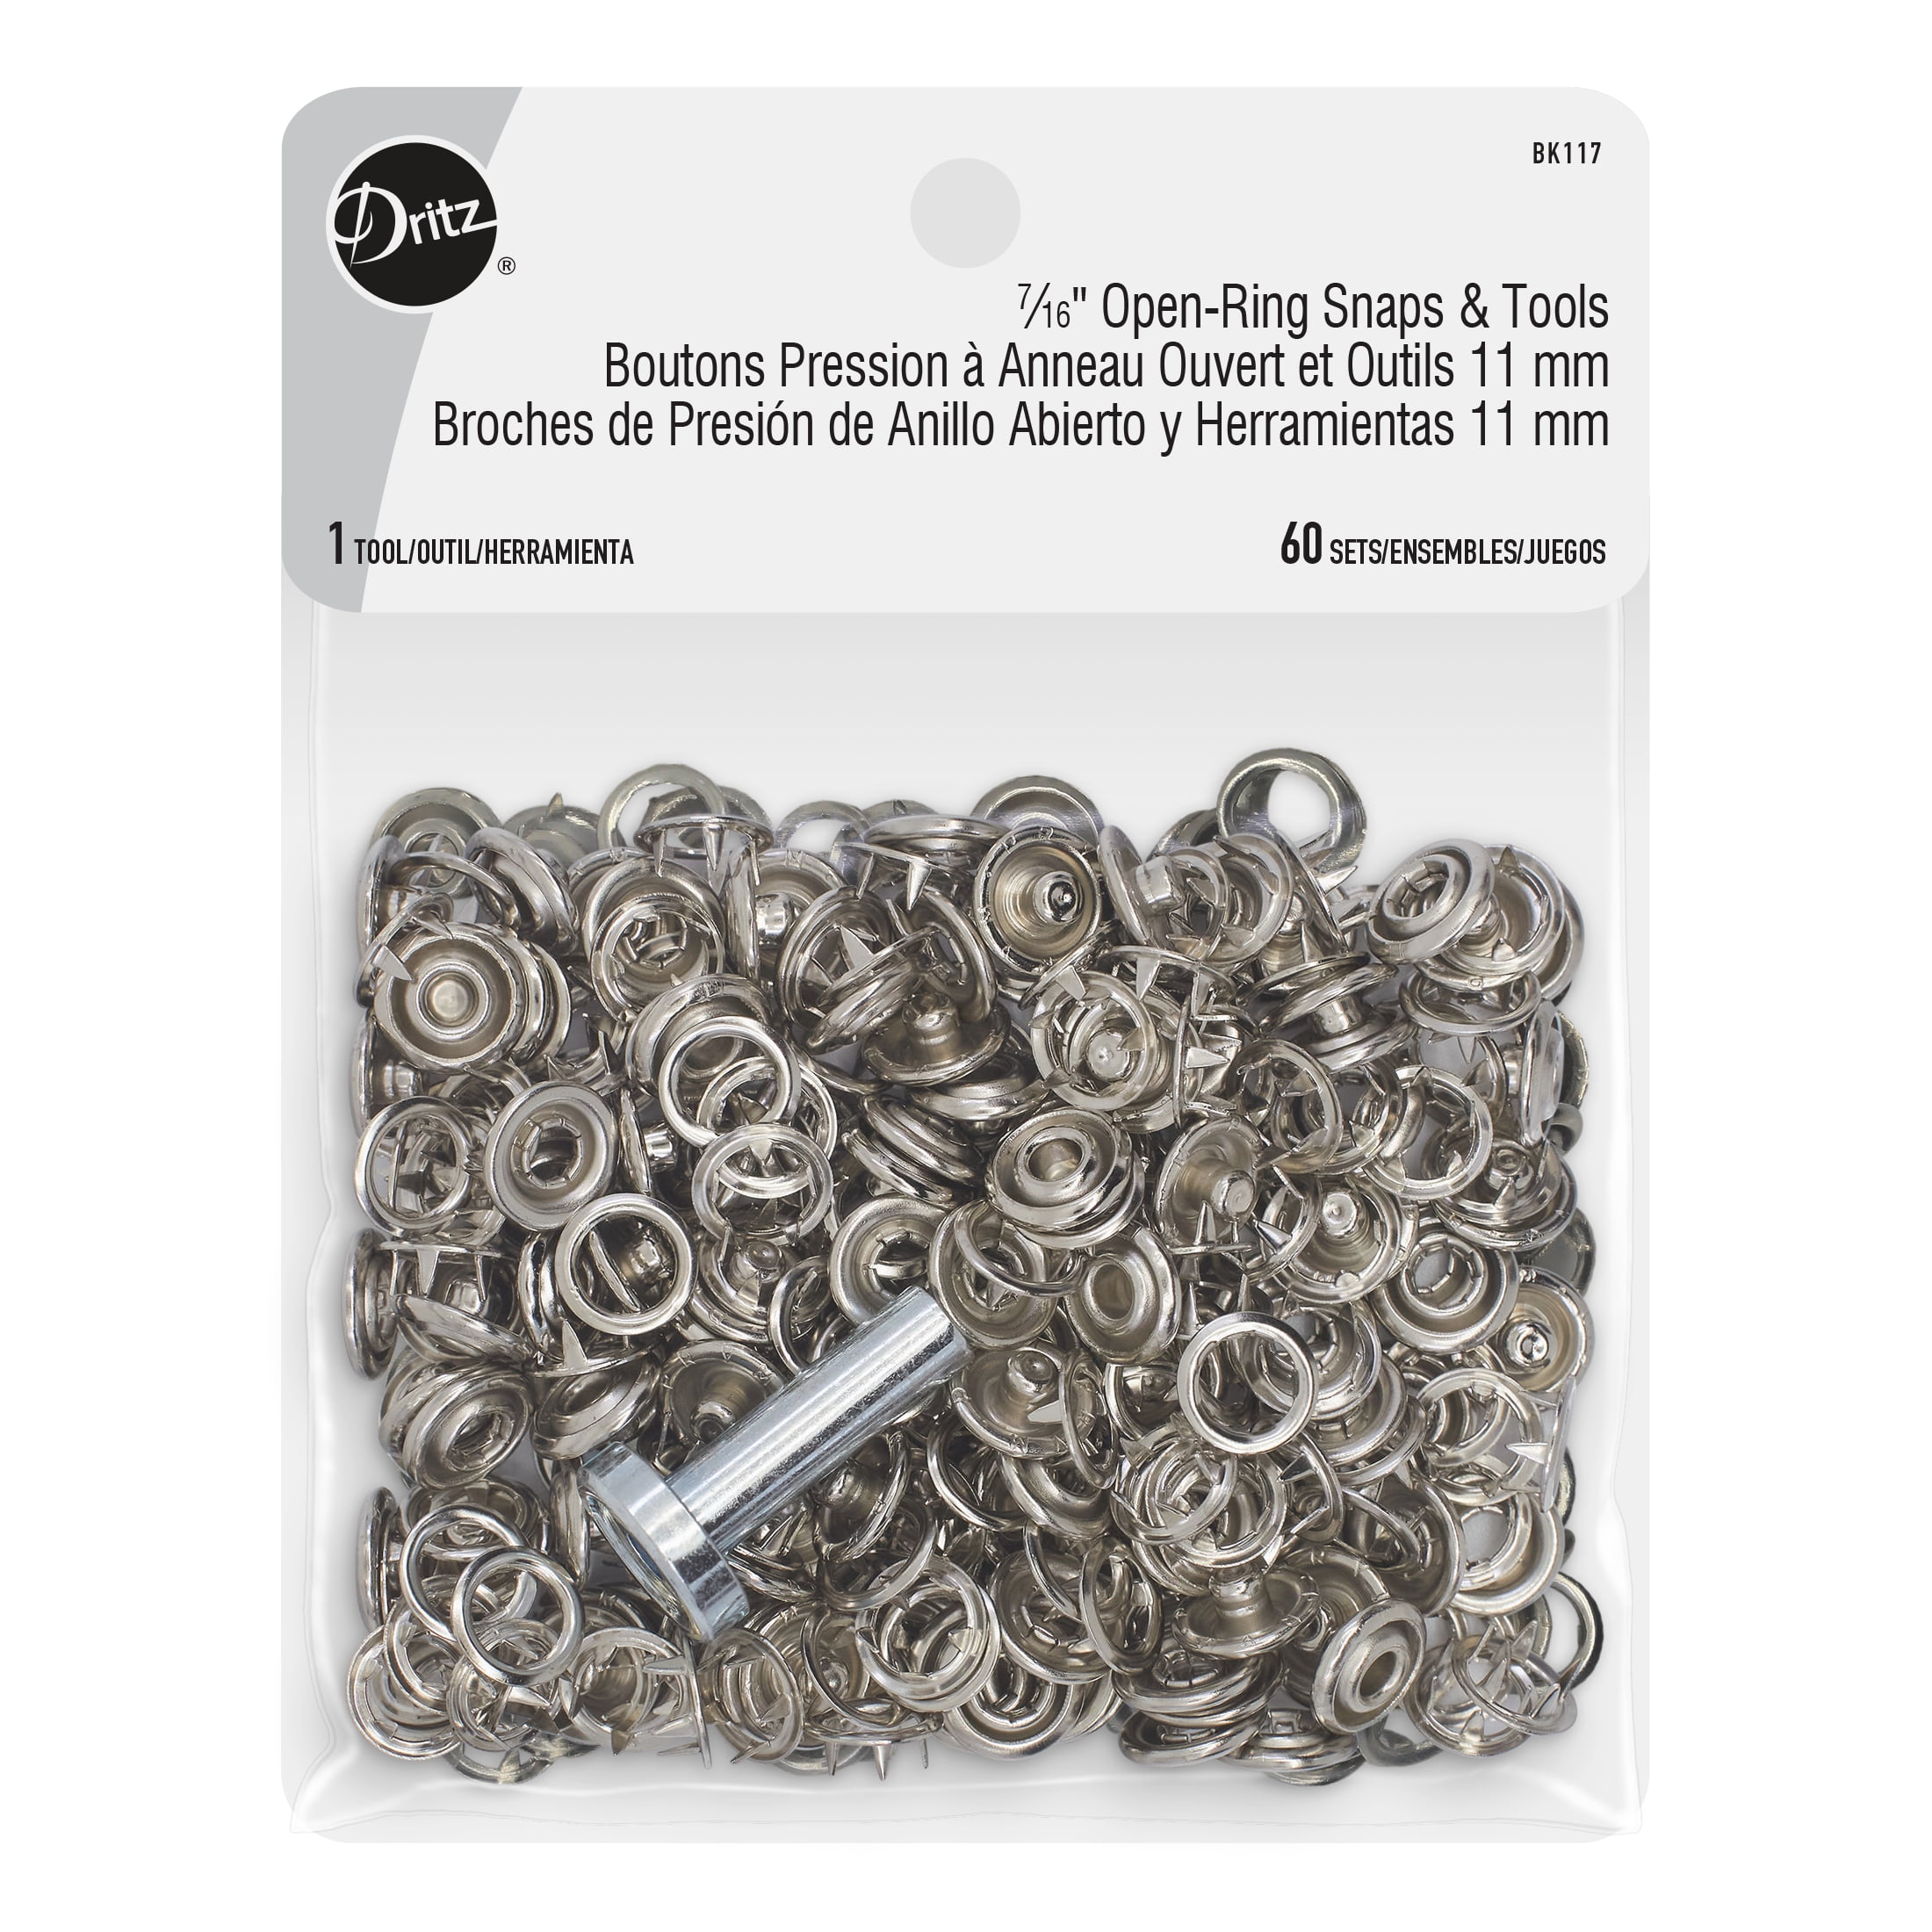 Lord & Hodge Canvas to Hard Surface Nickel-Plated Snap Fastener Kit 